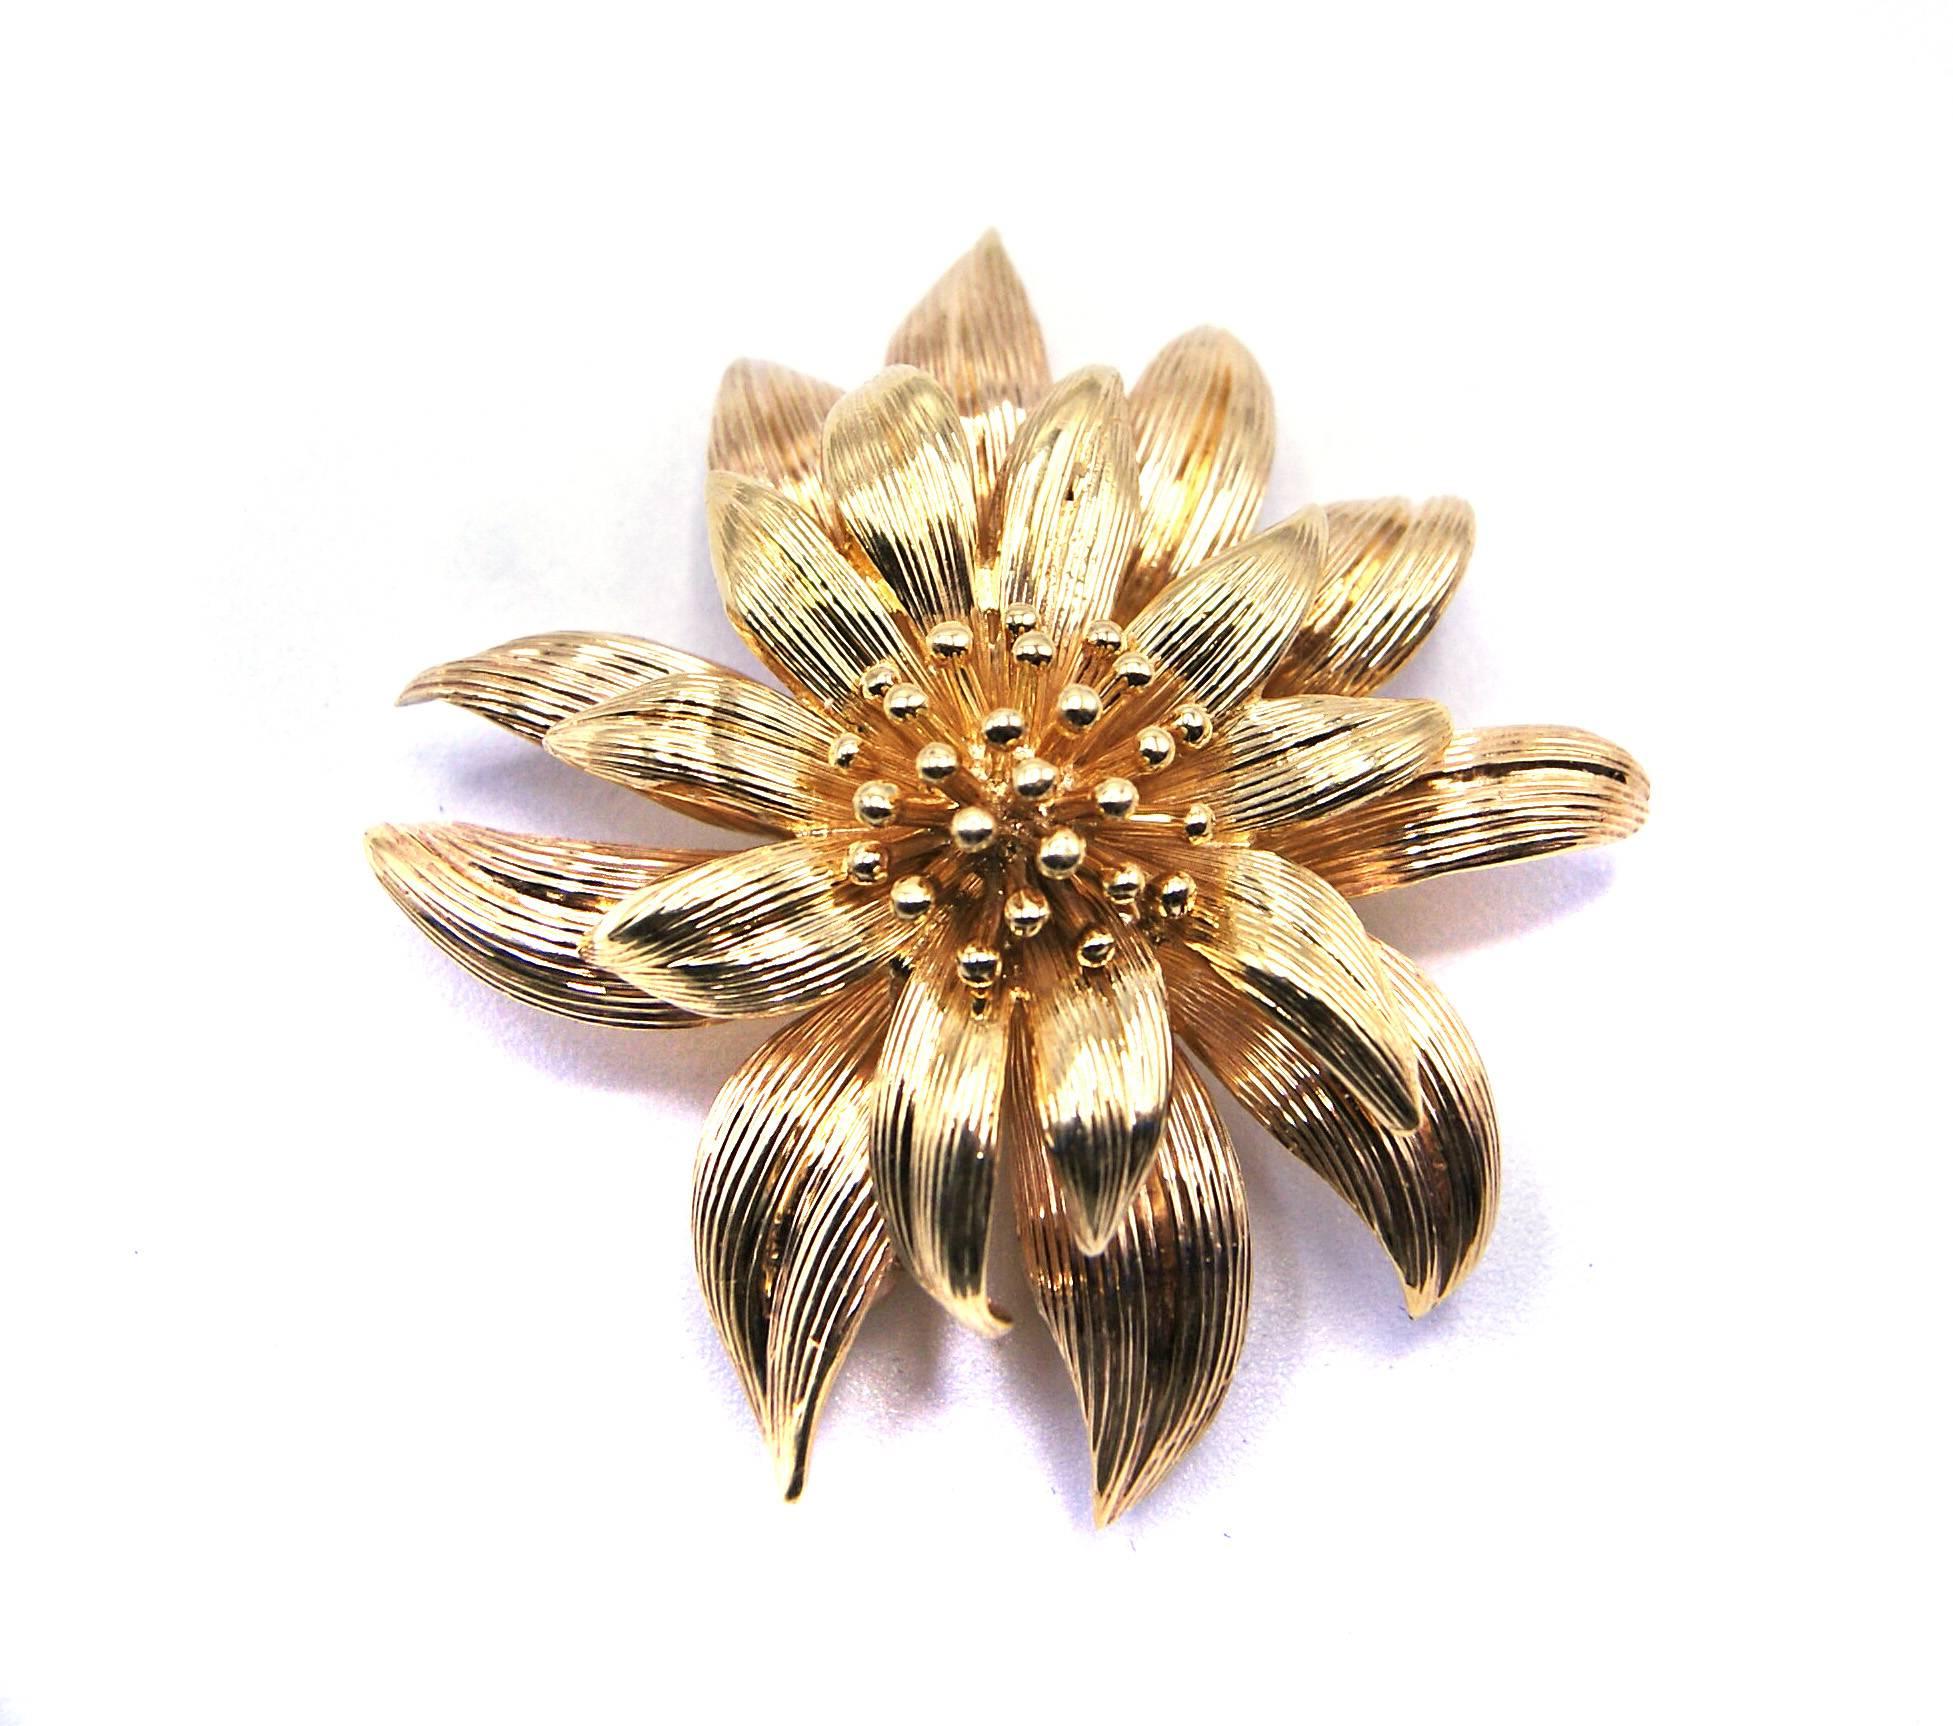 These beautiful waterlily-like flowers are great for everyday or special occasions, they are the perfect amount of adornment. Handcrafted in 14 karat yellow gold, these gorgeous flowers have been worked with incredible craftsmanship so that they